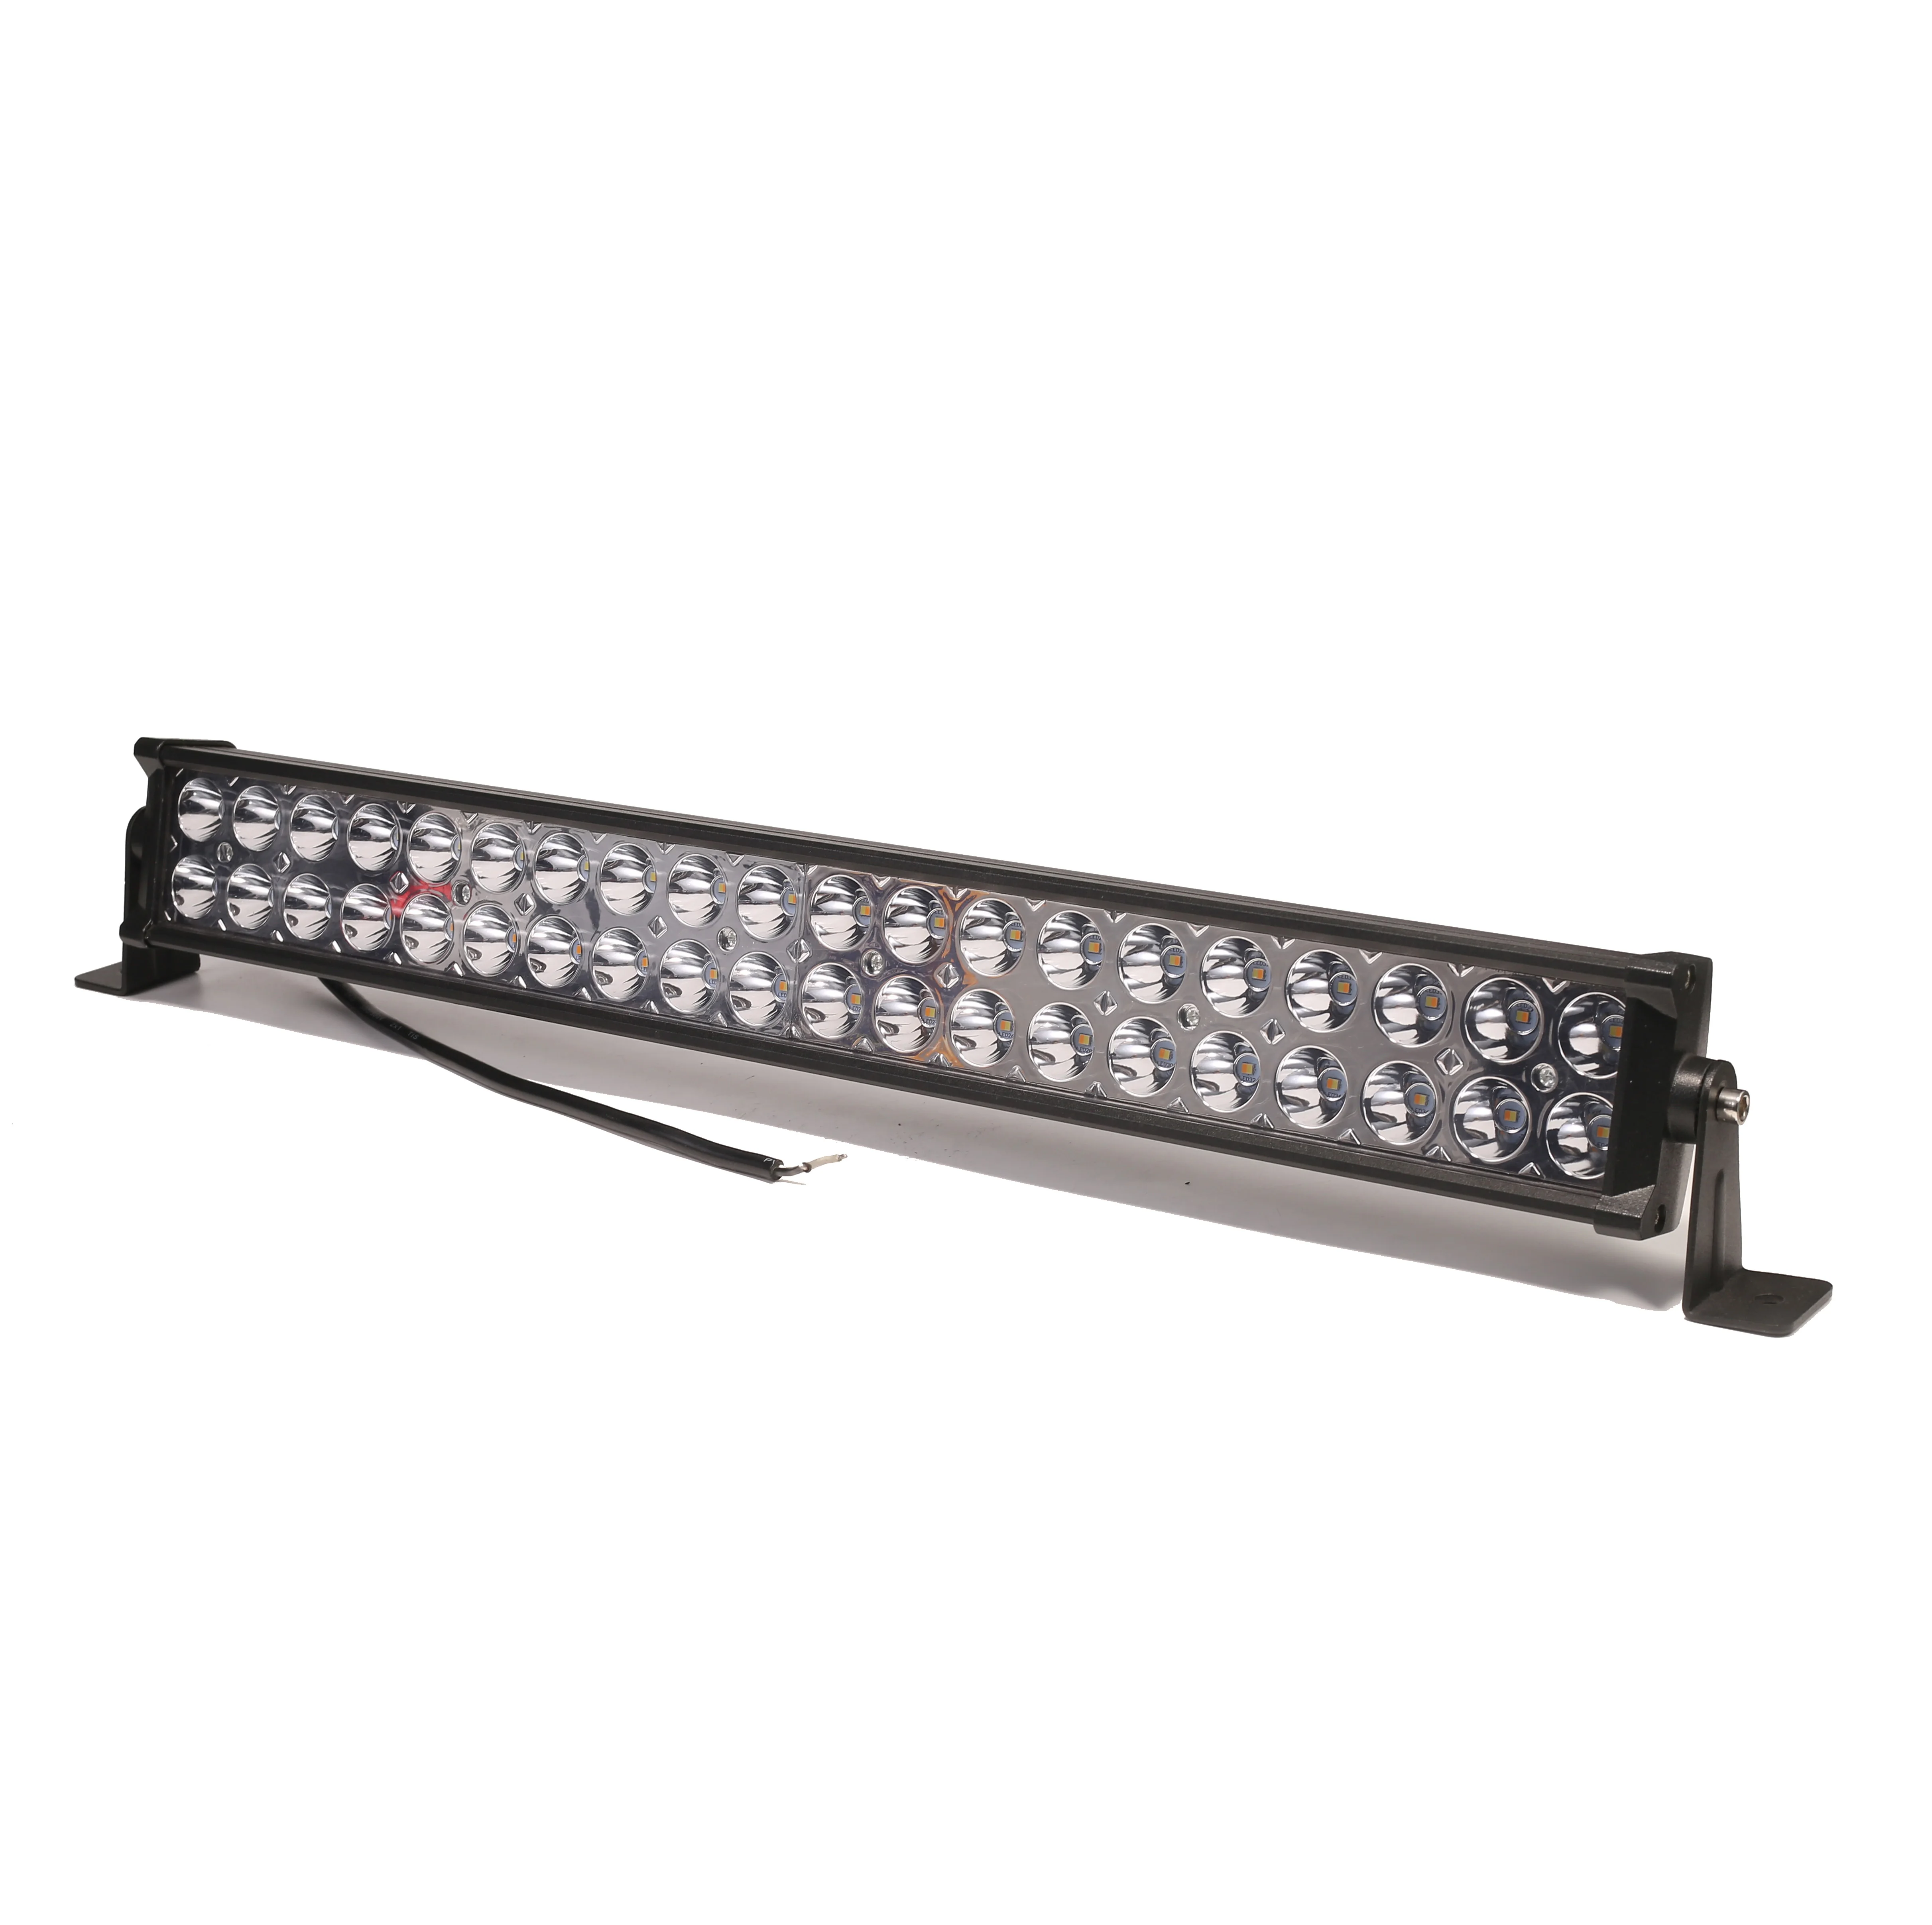 Car high power led light bar double color work light double row working lamp 120W Auto+Lighting+System